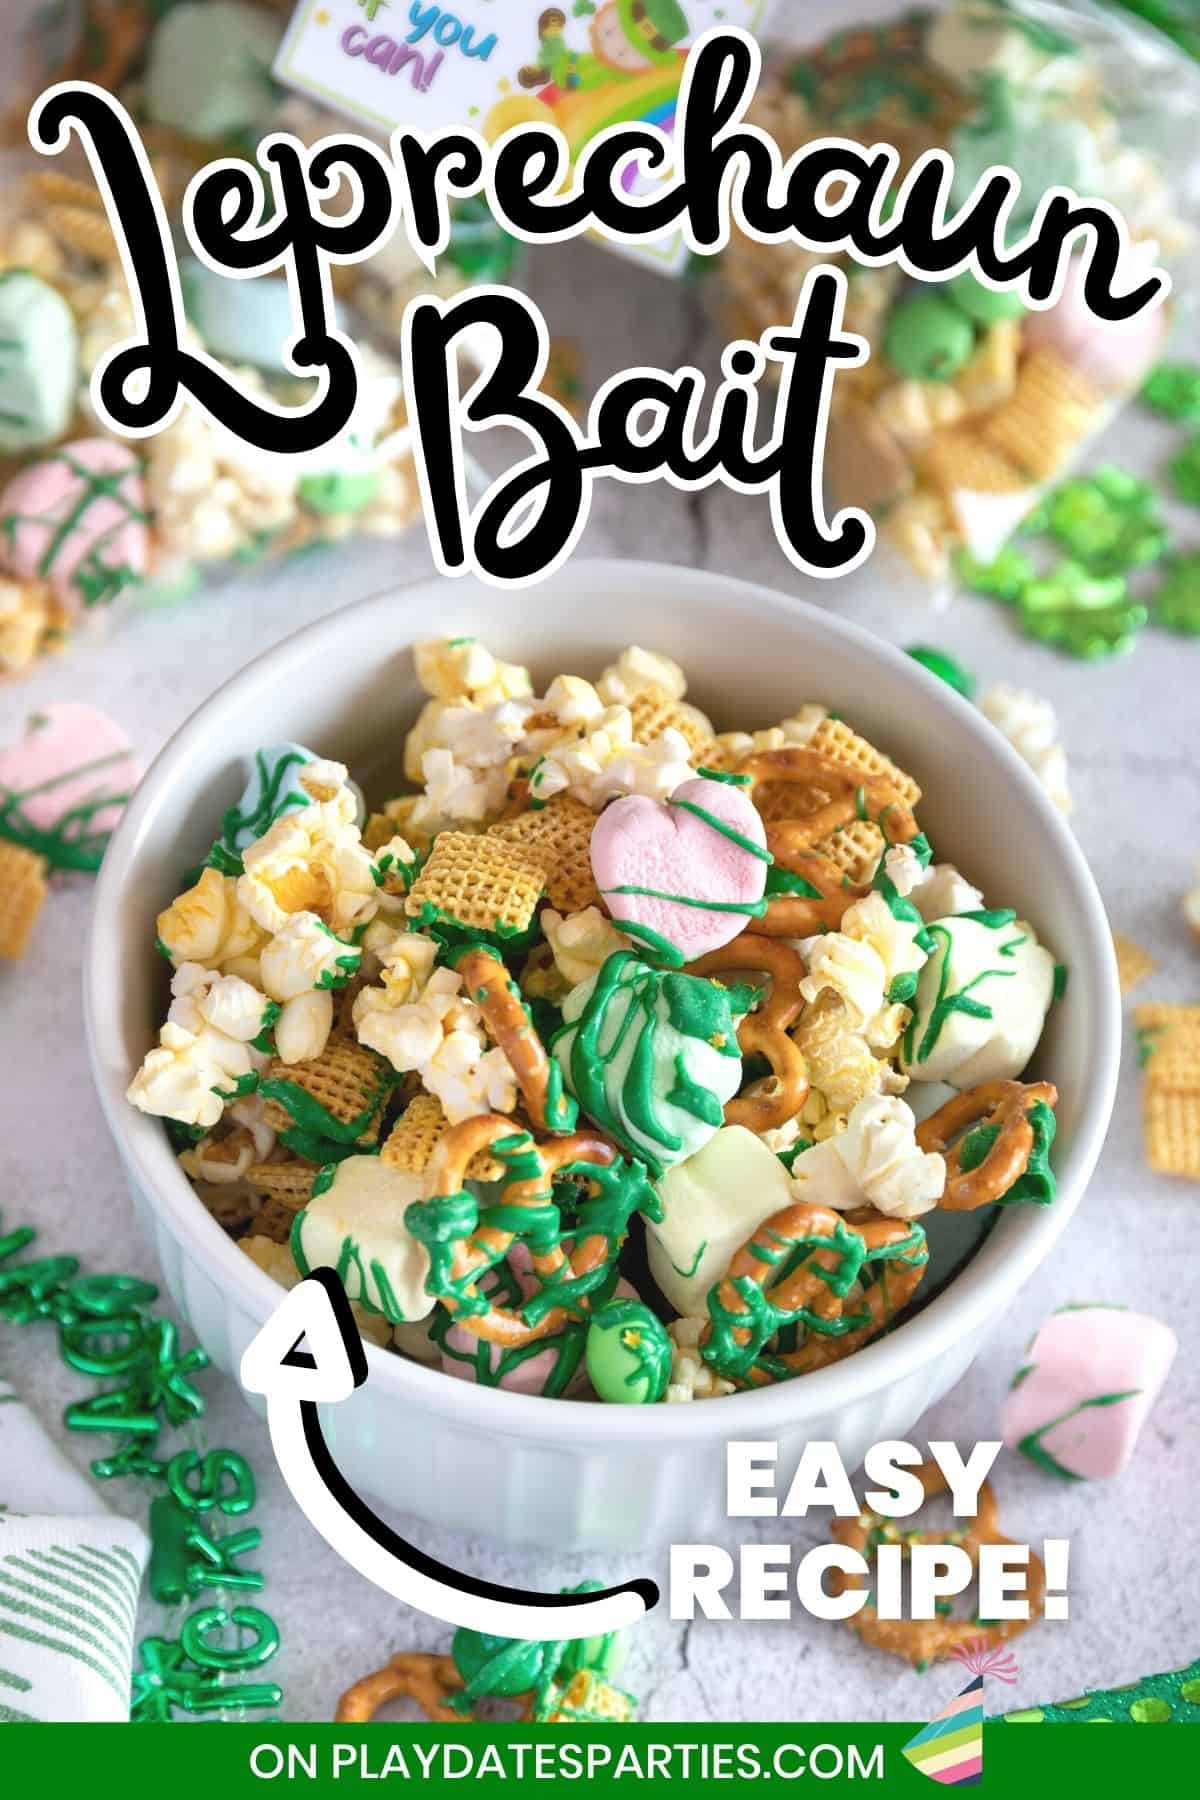 A bowl of St. Patrick's Day snack mix on a concrete surface with text overlay Leprechaun bait easy recipe.